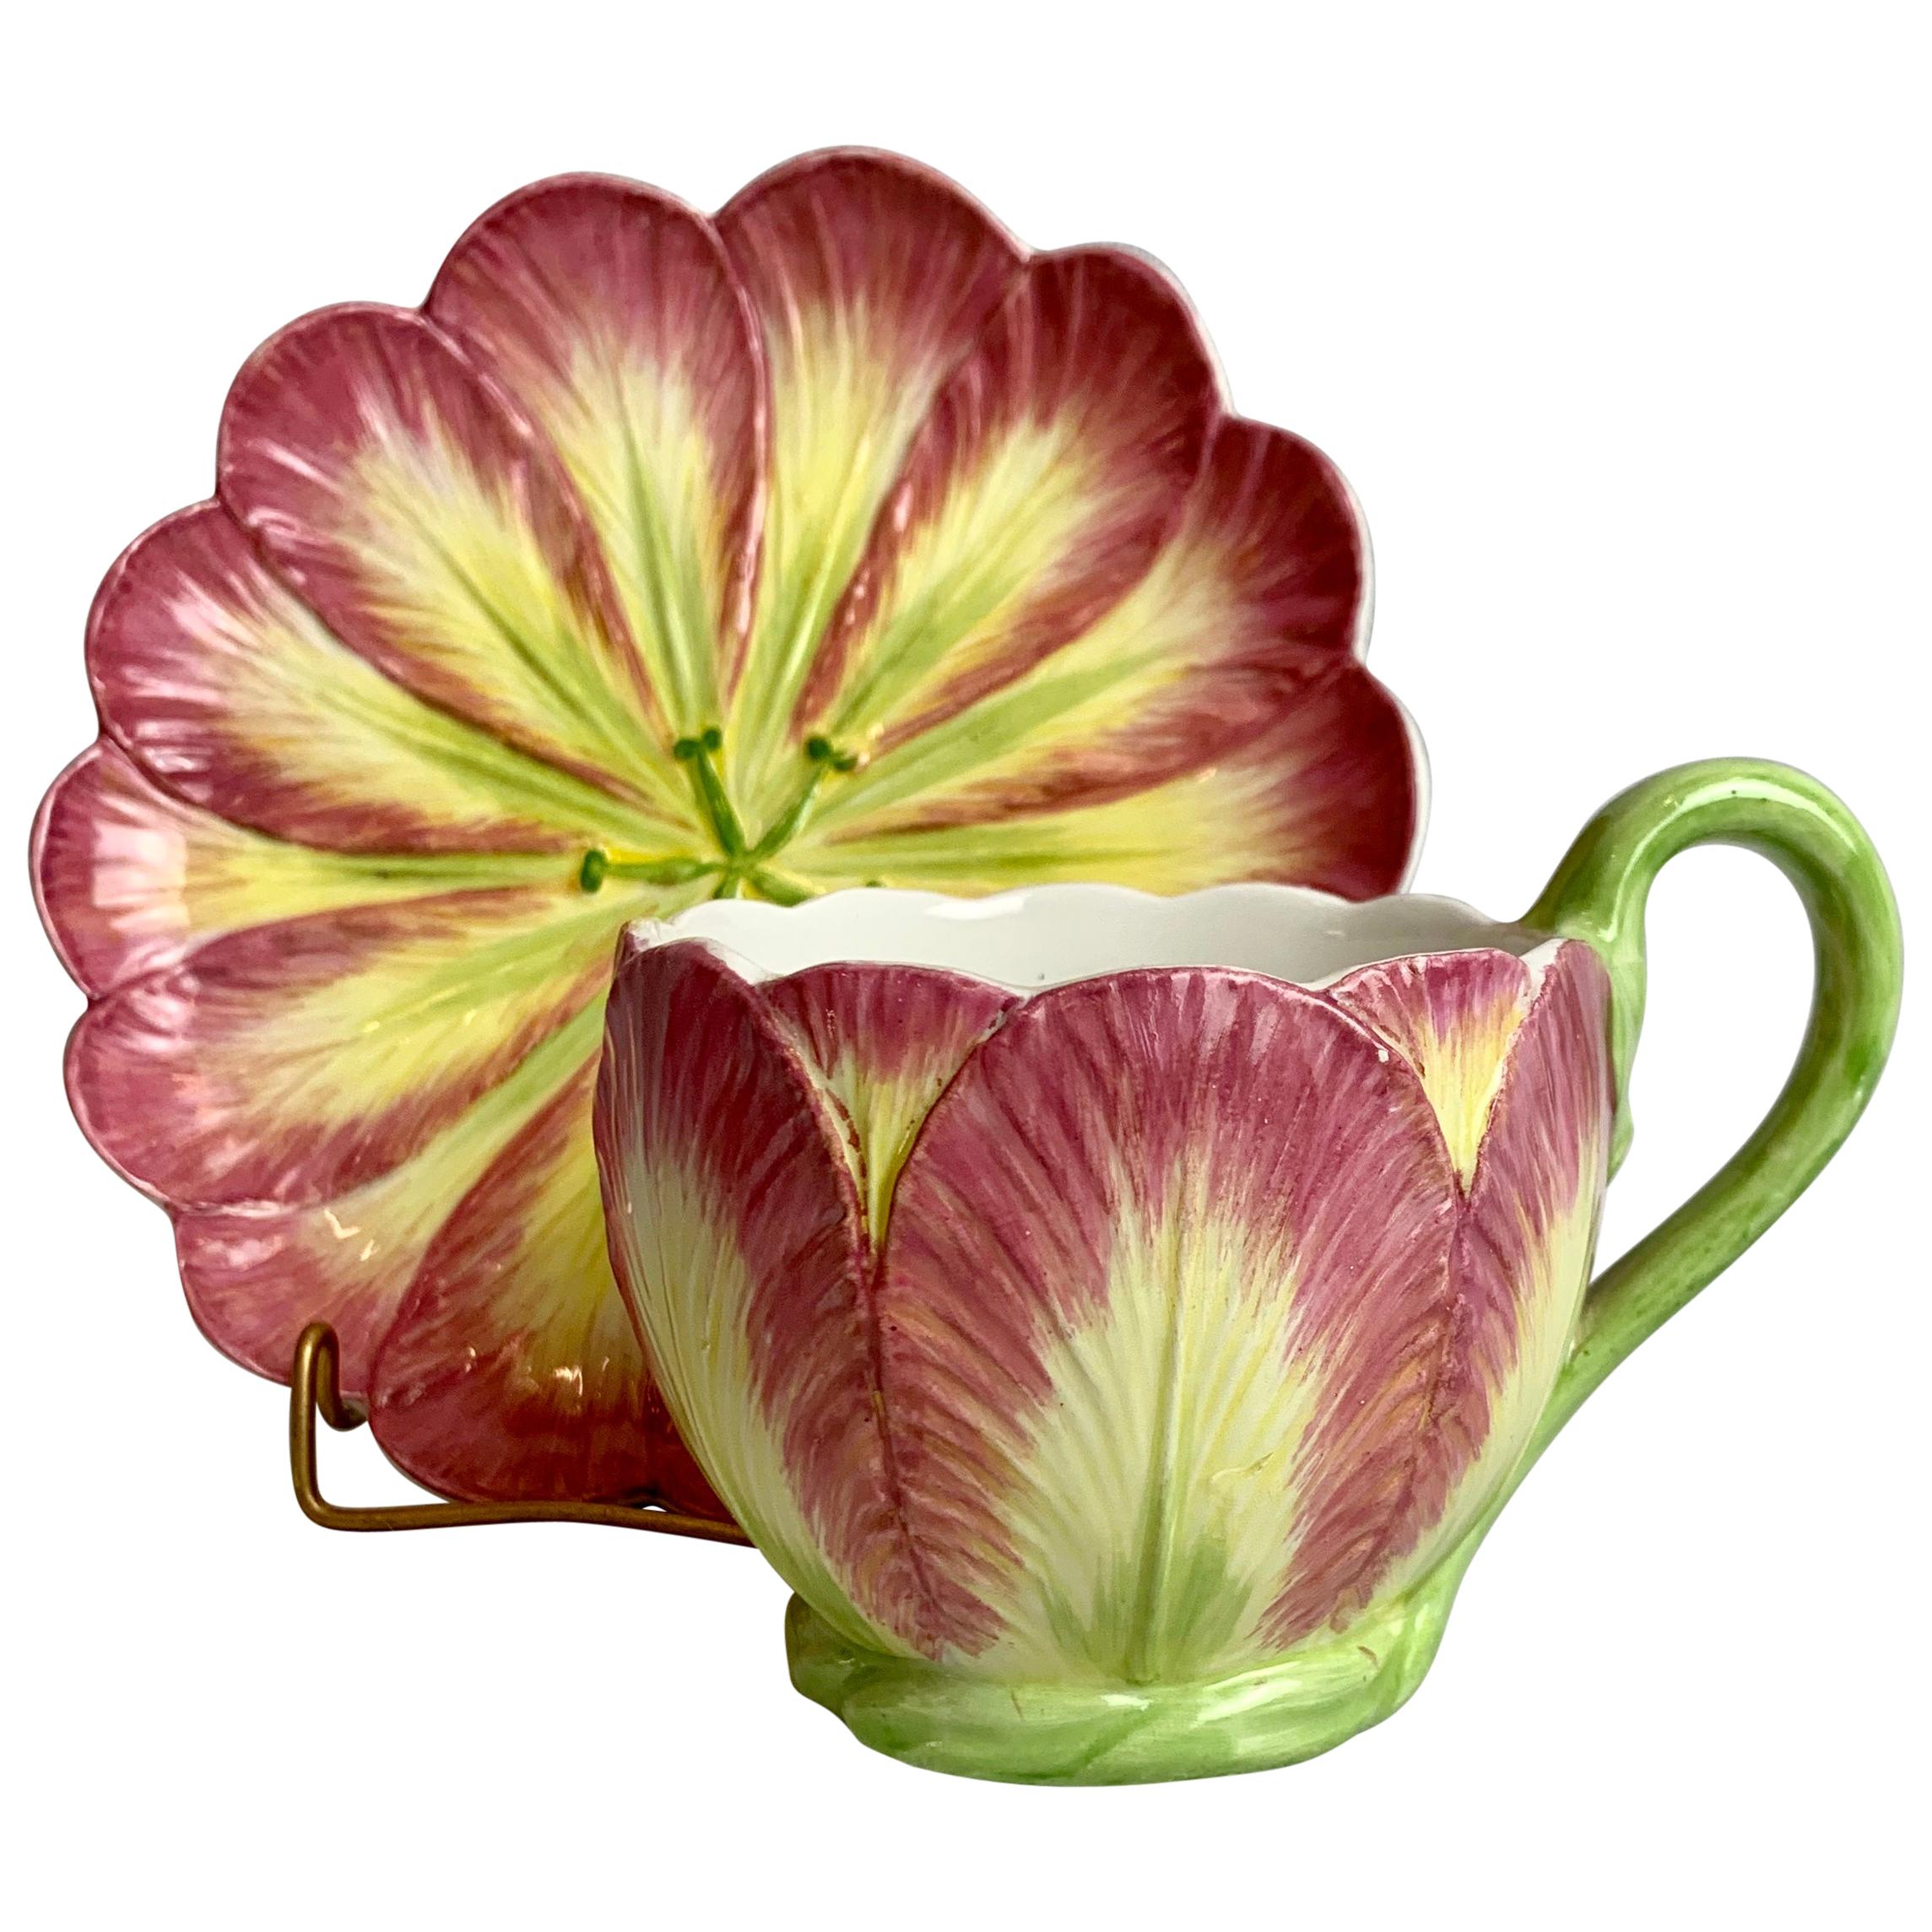  Majolica Cup and Saucer with Tulip Motif by Mottahedeh